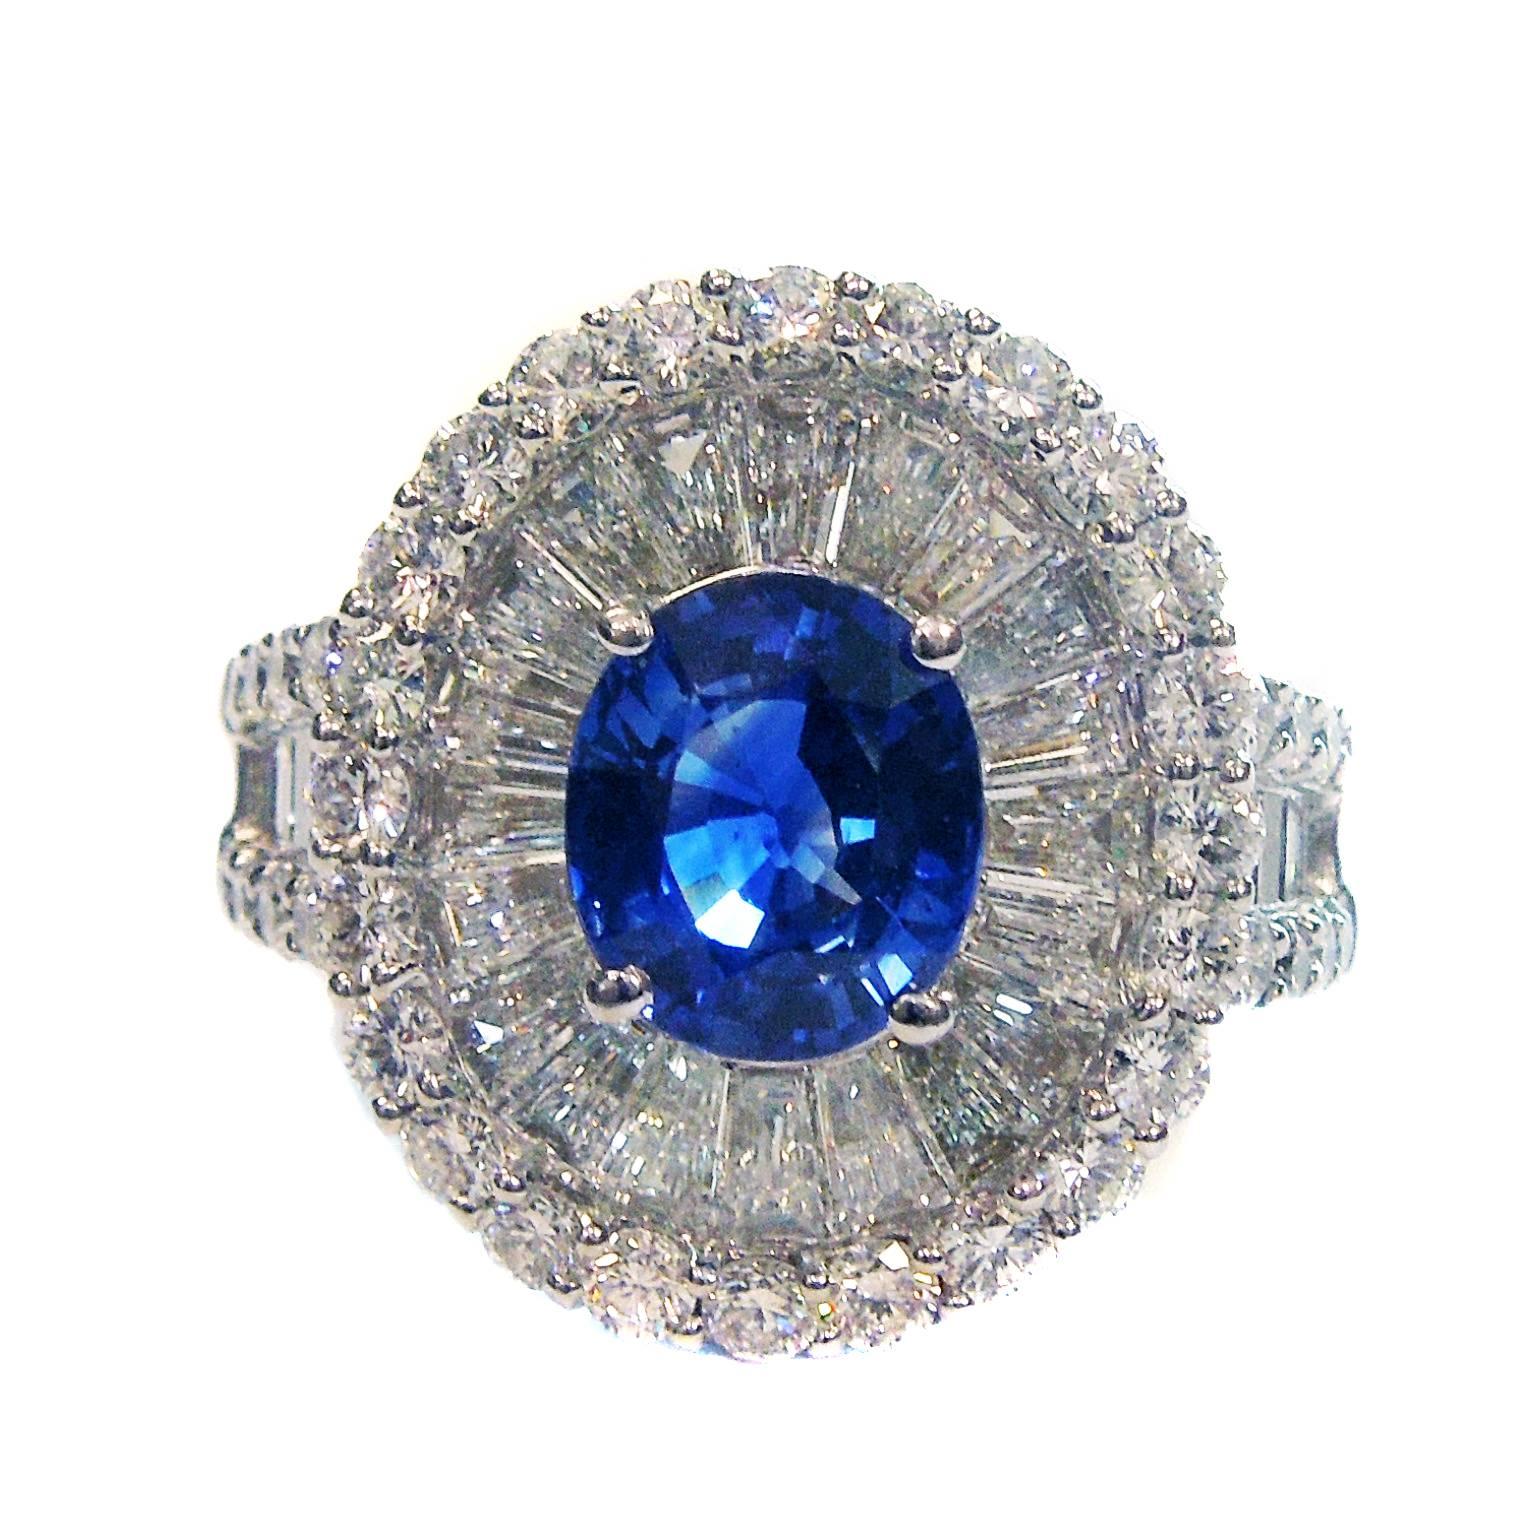 18K White Gold Ring with Blue Sapphire Center and Diamonds

Apprx. 2.00ct. Blue Sapphire Center

Emerald and Round cut diamonds all throughout. 3.00ct. apprx. total weight.

0.7 inch Face Length. 0.6 Face Width. 0.3 band width

Currently size 6.5.